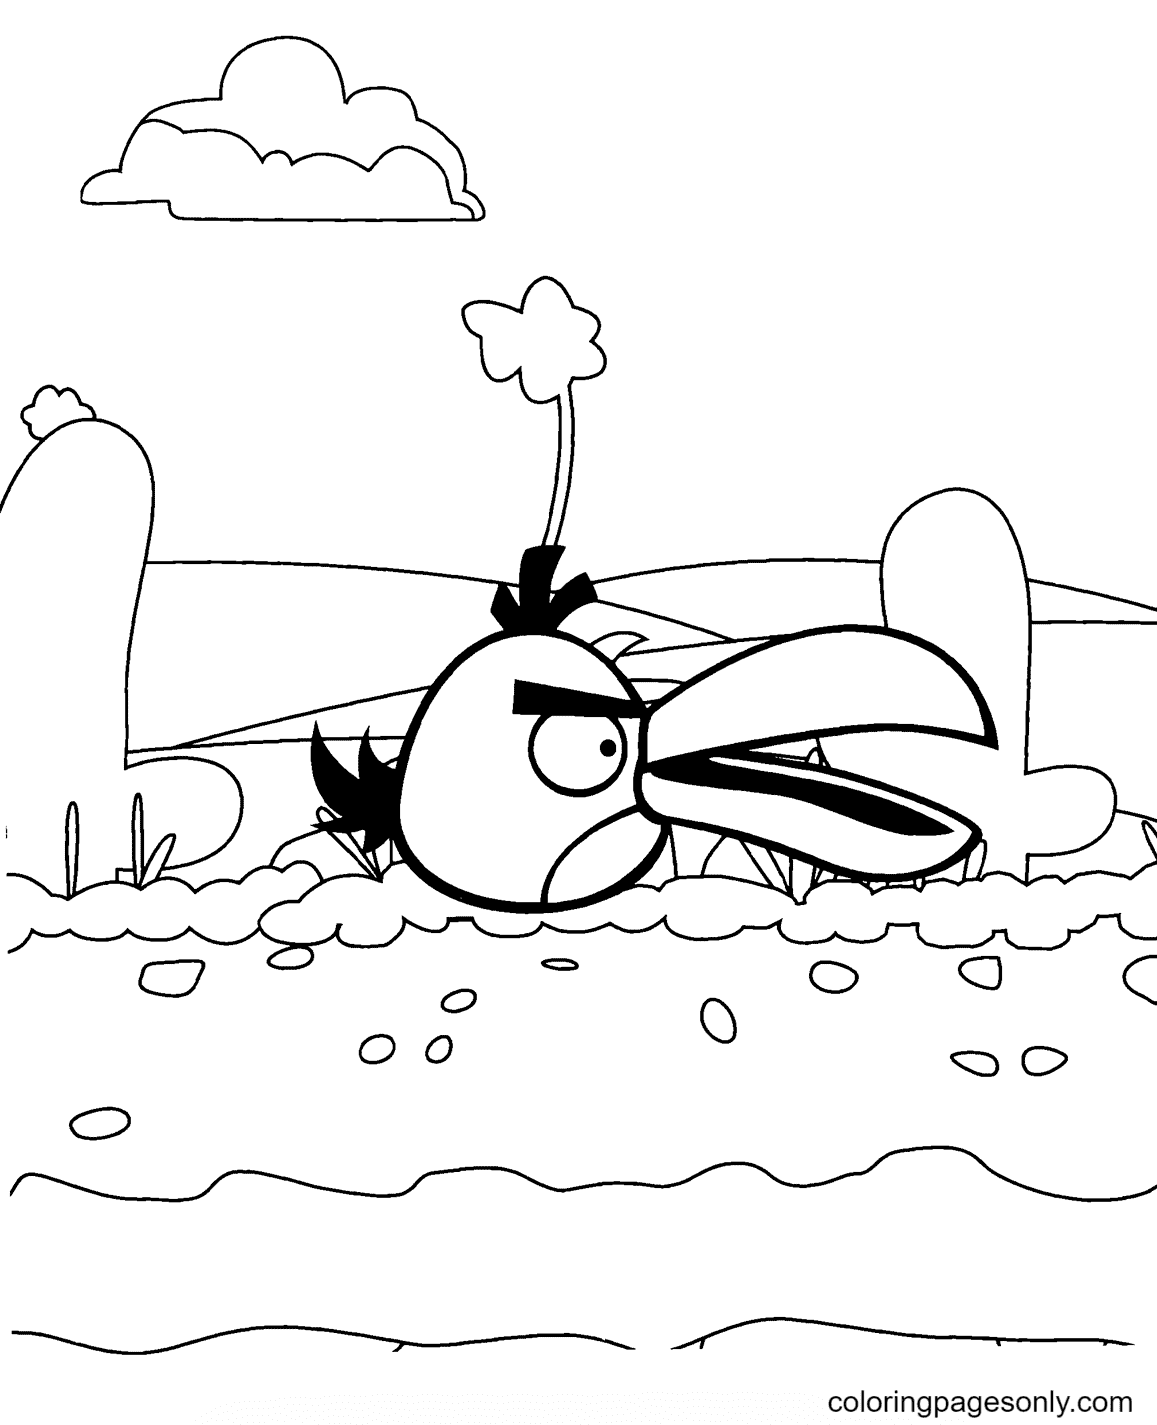 Hal Bird in Desert Coloring Pages